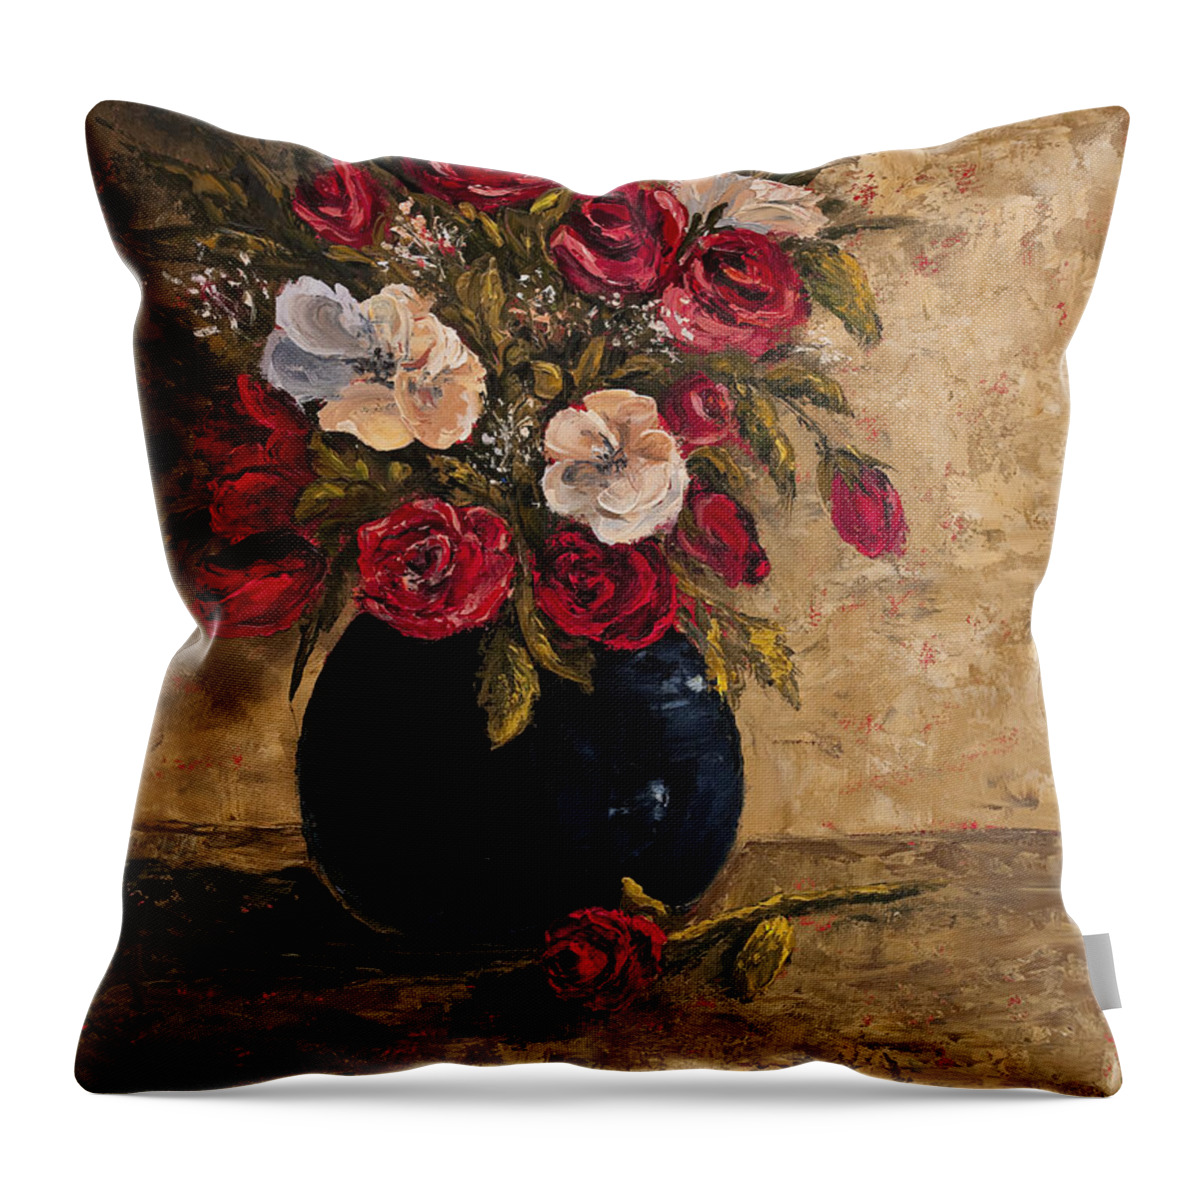 Still Life Throw Pillow featuring the painting Touch Of Elegance by Darice Machel McGuire